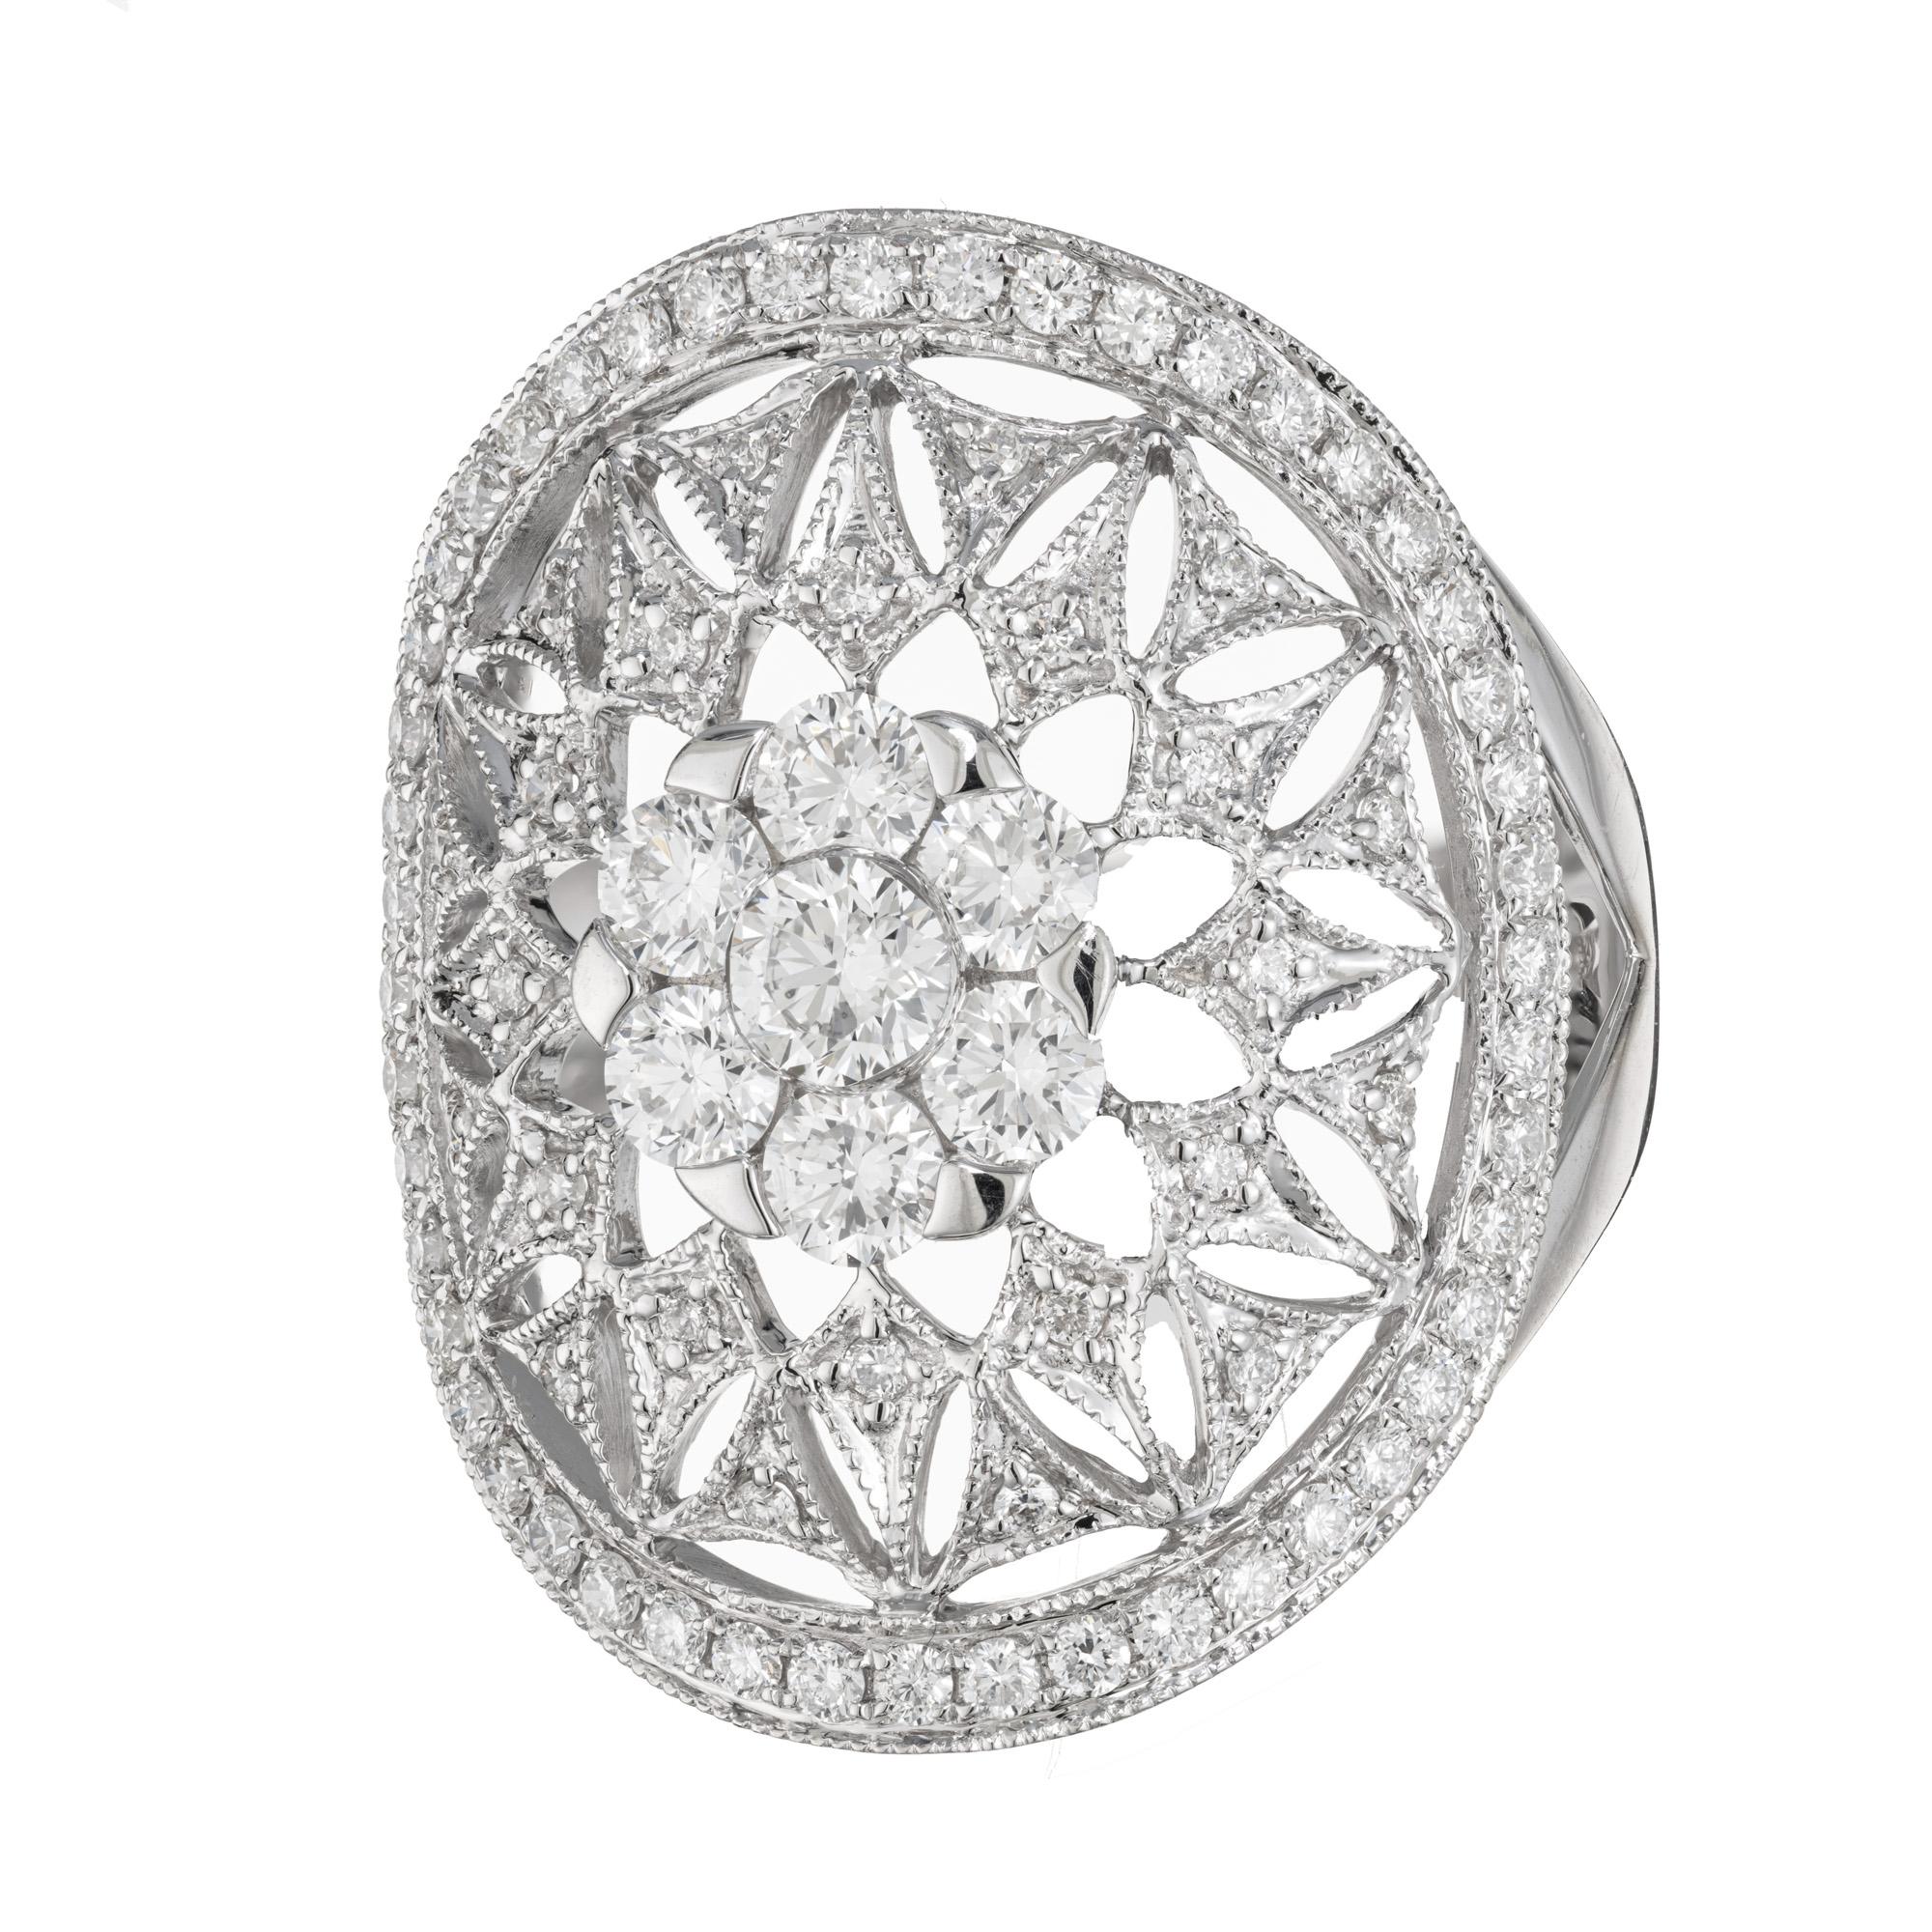 Spectacular diamond dome large cocktail ring. This ring boats 79 round brilliant cut diamonds of all different sizes. The largest one being in a center cluster with a halo of 6 round diamonds. Connected to the cluster is a pattern of interconnected